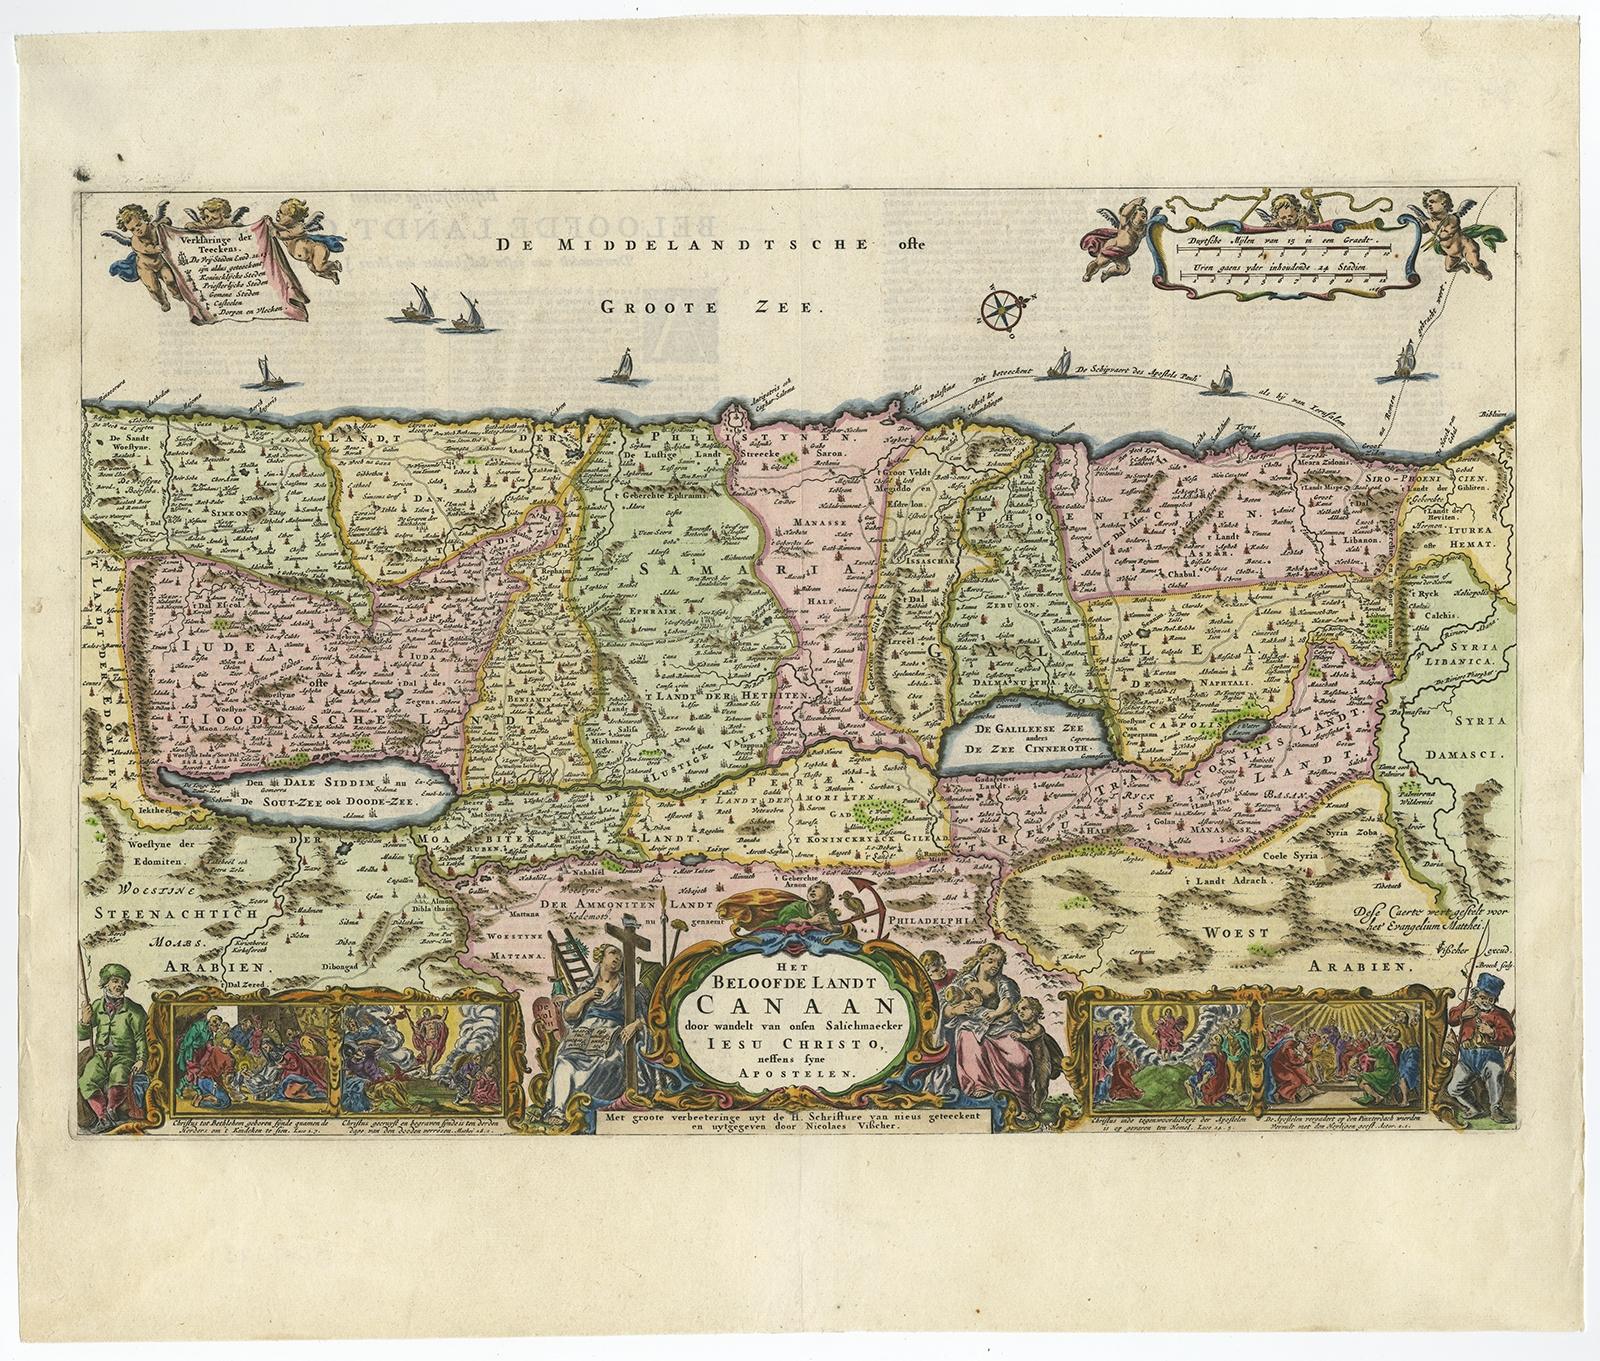 Antique map titled 'Het Beloofde Landt Canaan door wandelt van onsen Salichmaeker Jesu Christo neffens syne Apostelen.' 

Detailed map of the Holy Land, showing the travels of Christ and the Apostles, including Paul's travel's at sea and numerous